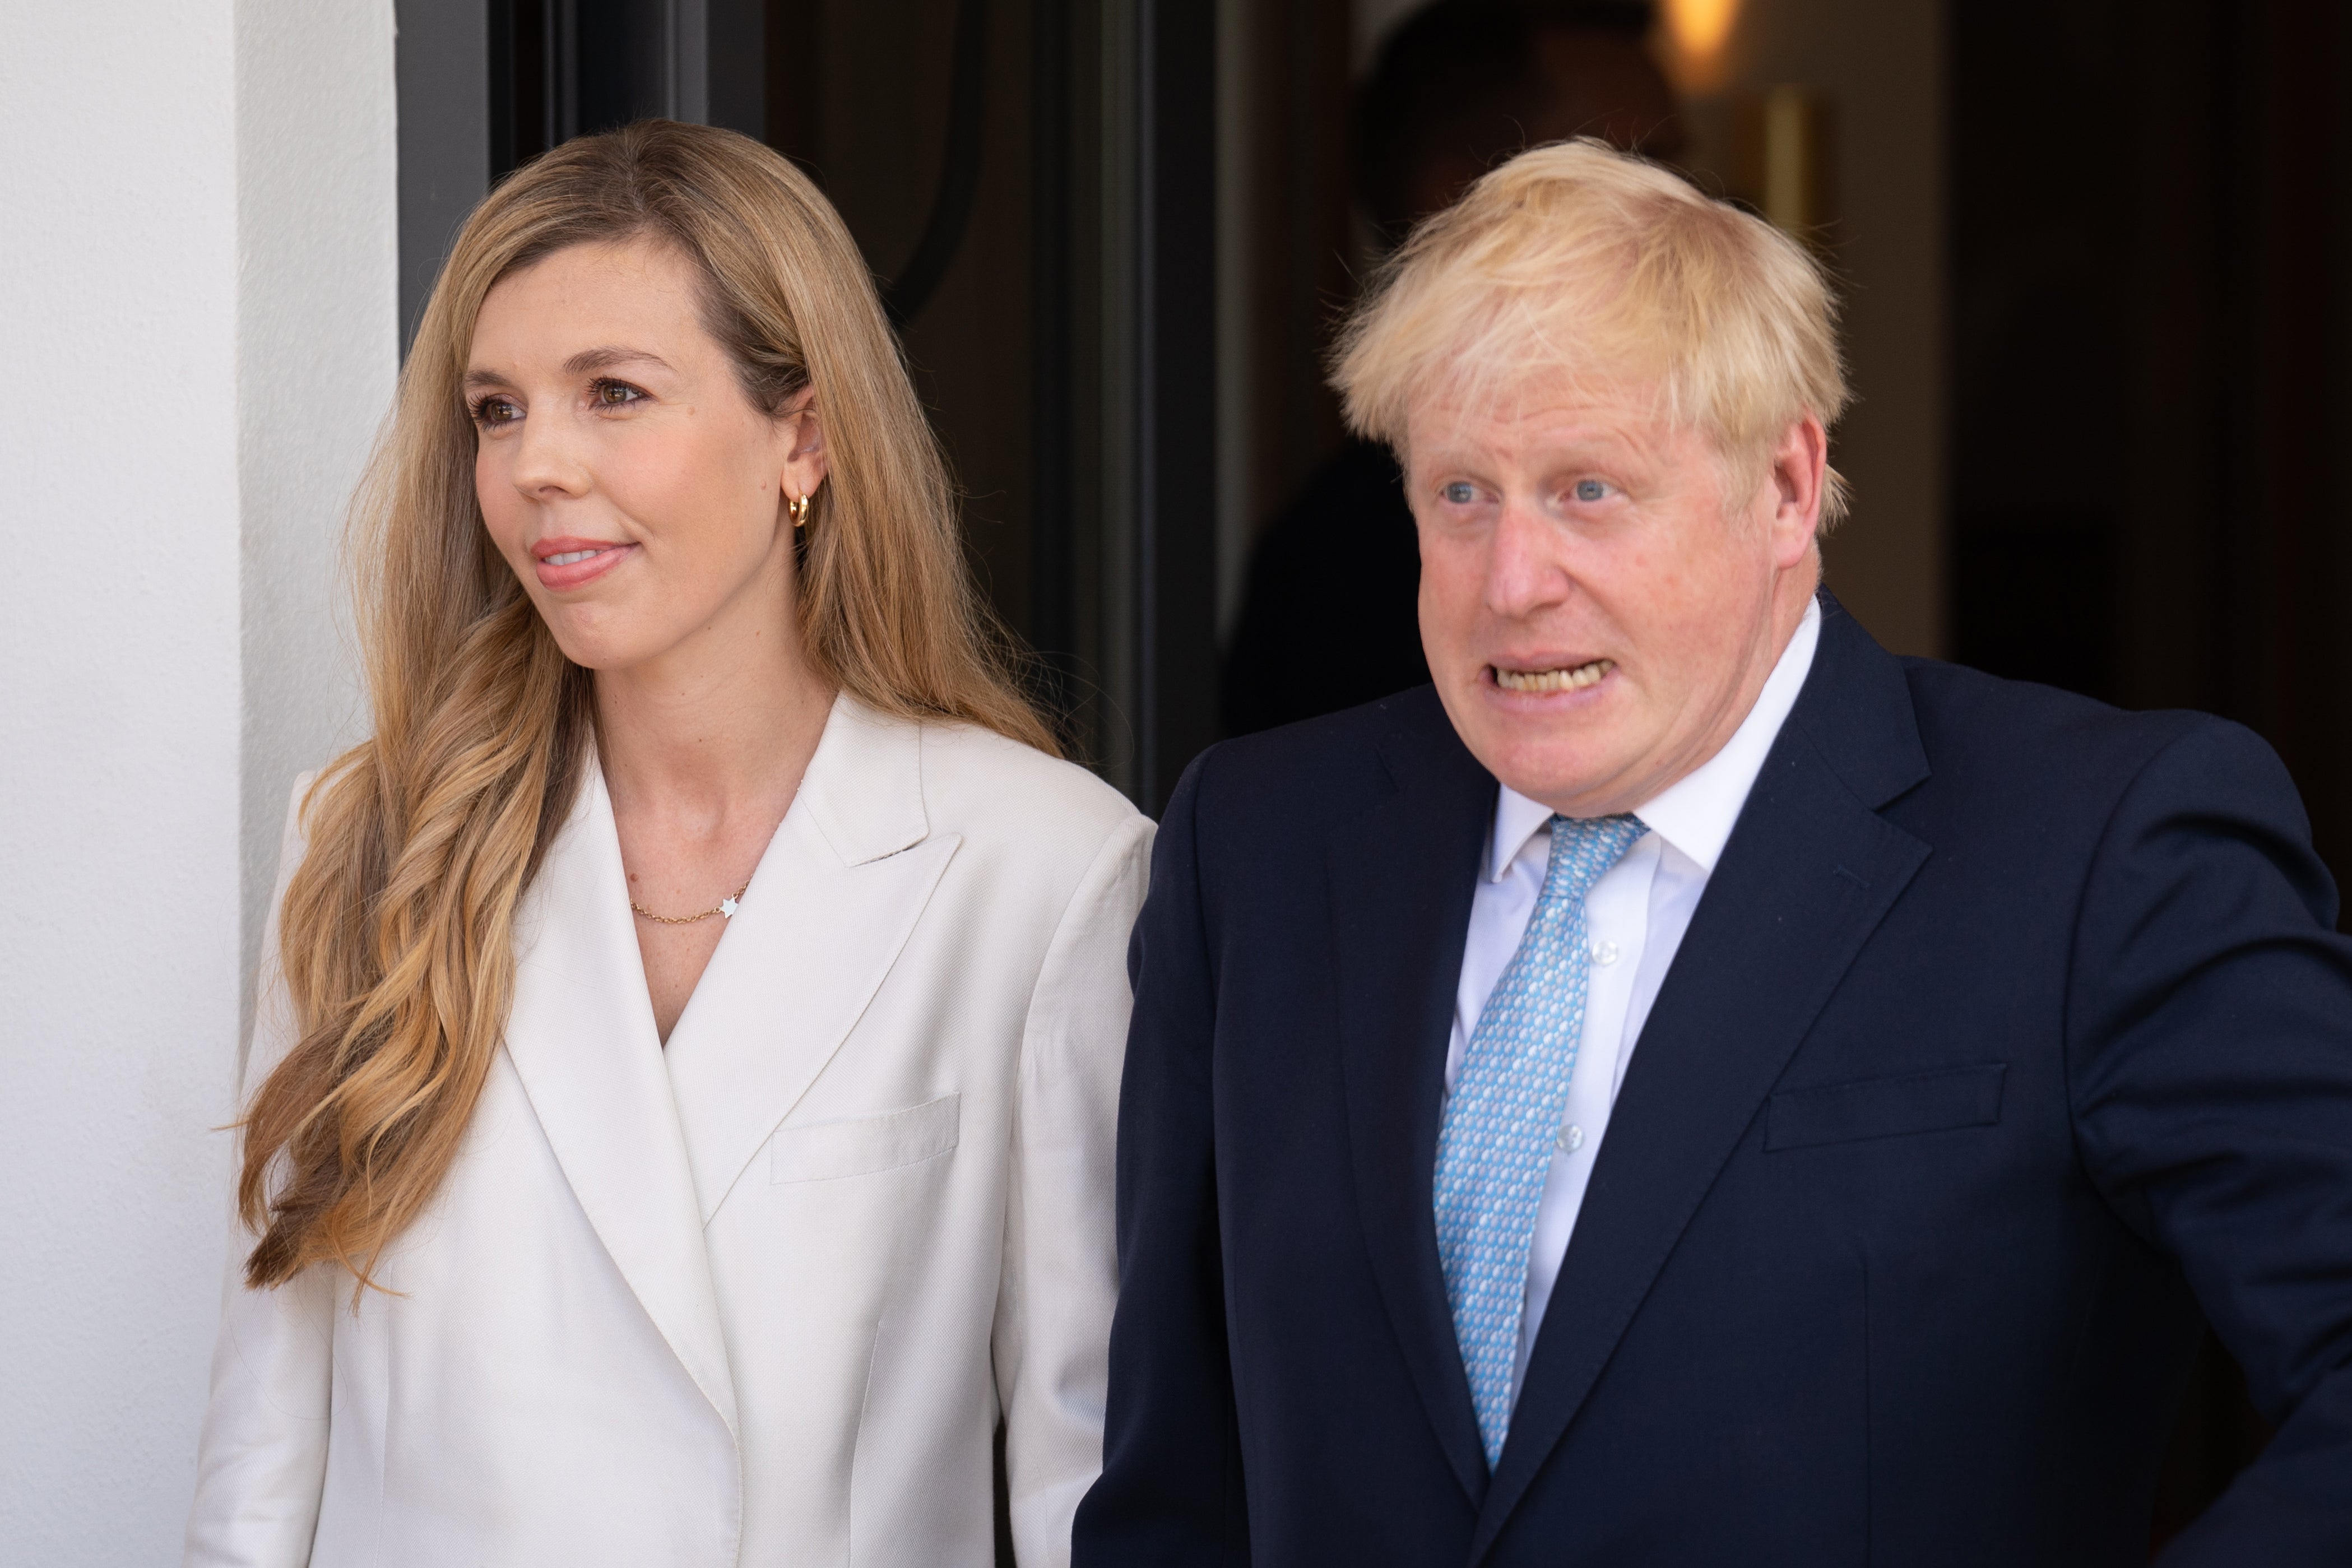 Prime Minister Boris Johnson and his wife Carrie (Stefan Rousseau/PA)